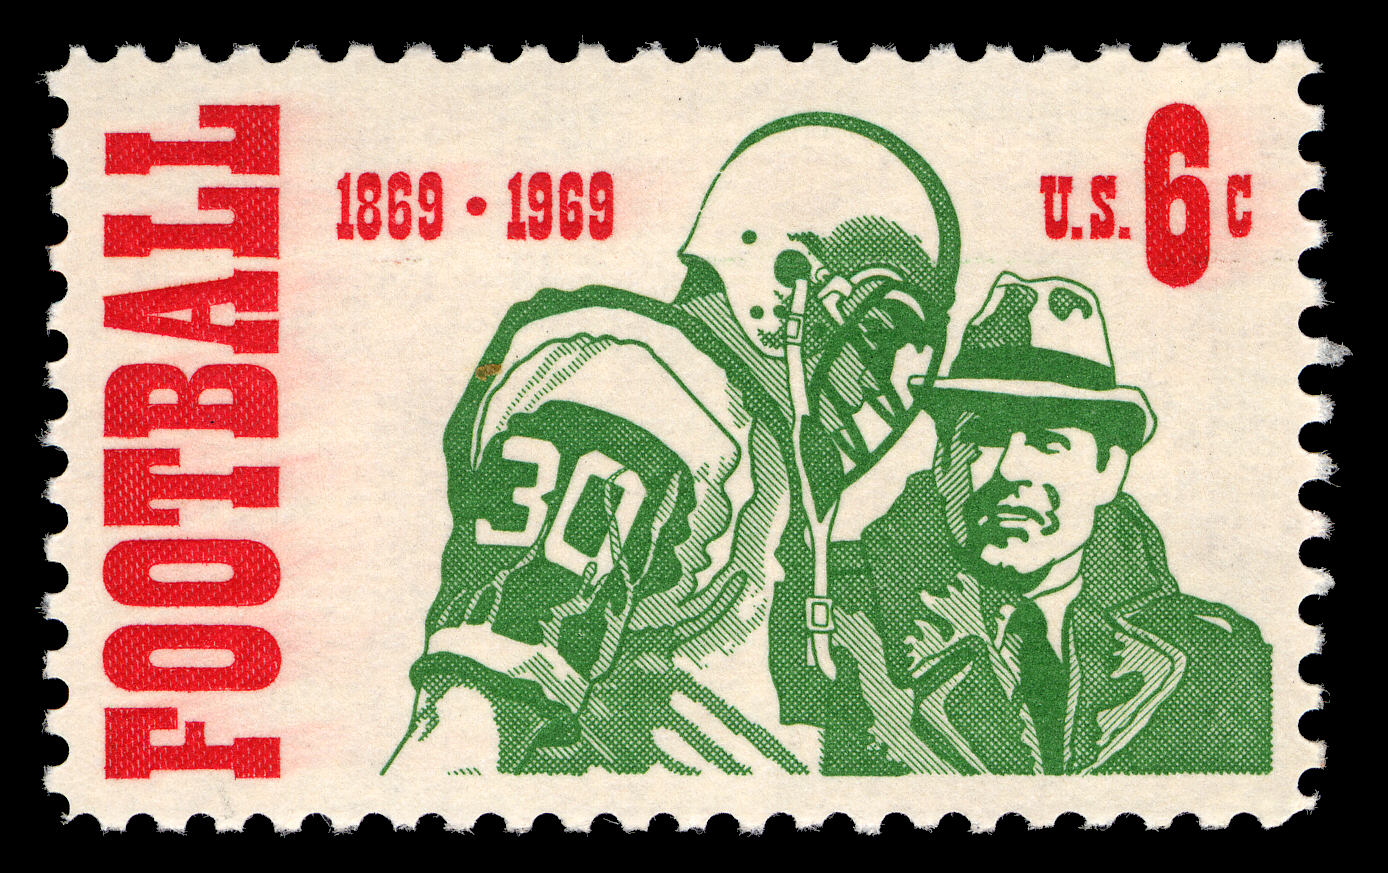 Postage stamp with image of football player in uniform standing next to man in hat and coat, presumably the coach.